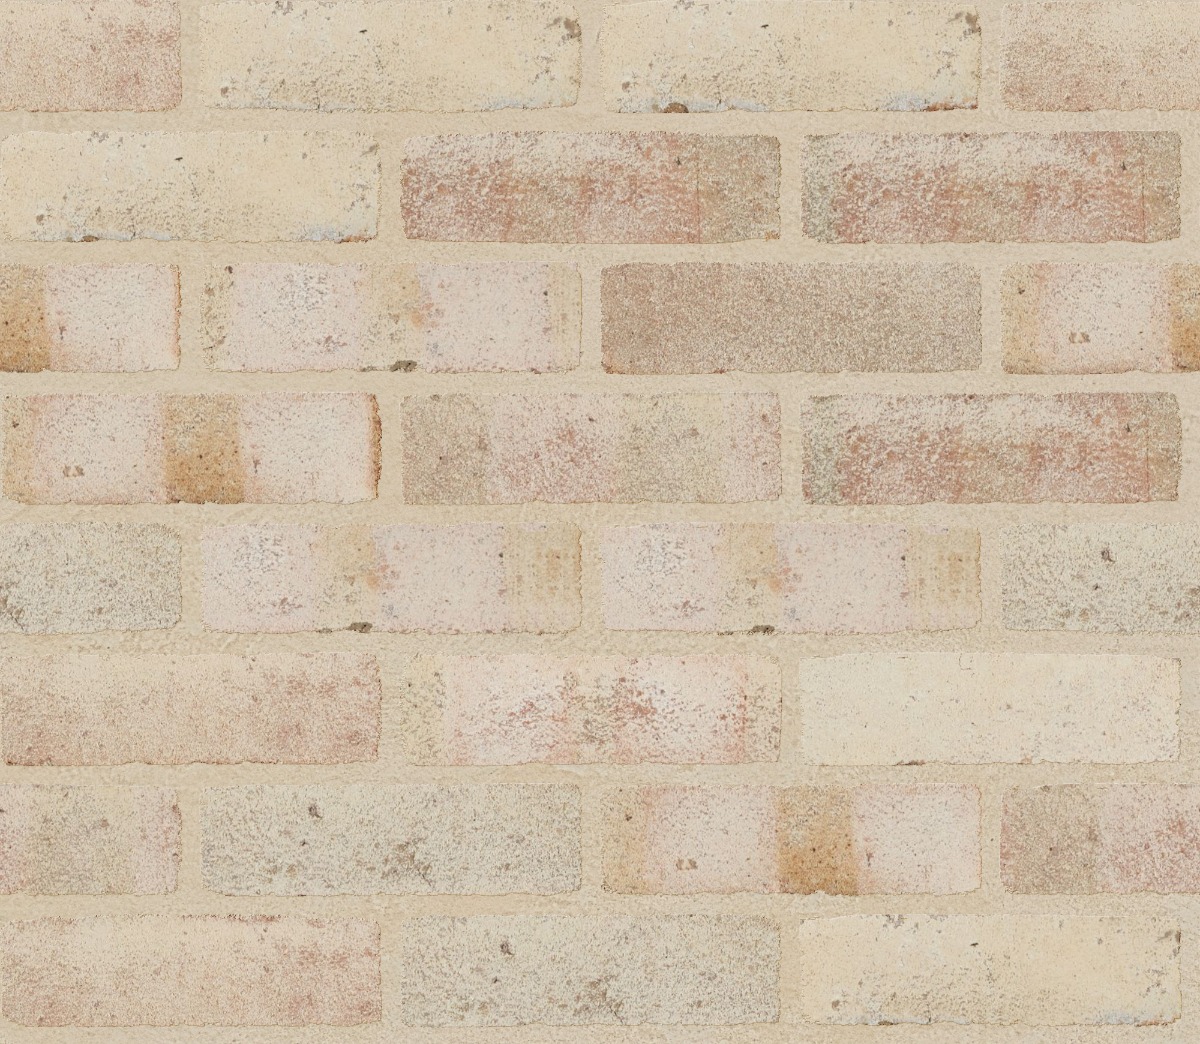 A seamless brick texture with belcrest 650 units arranged in a Stretcher pattern